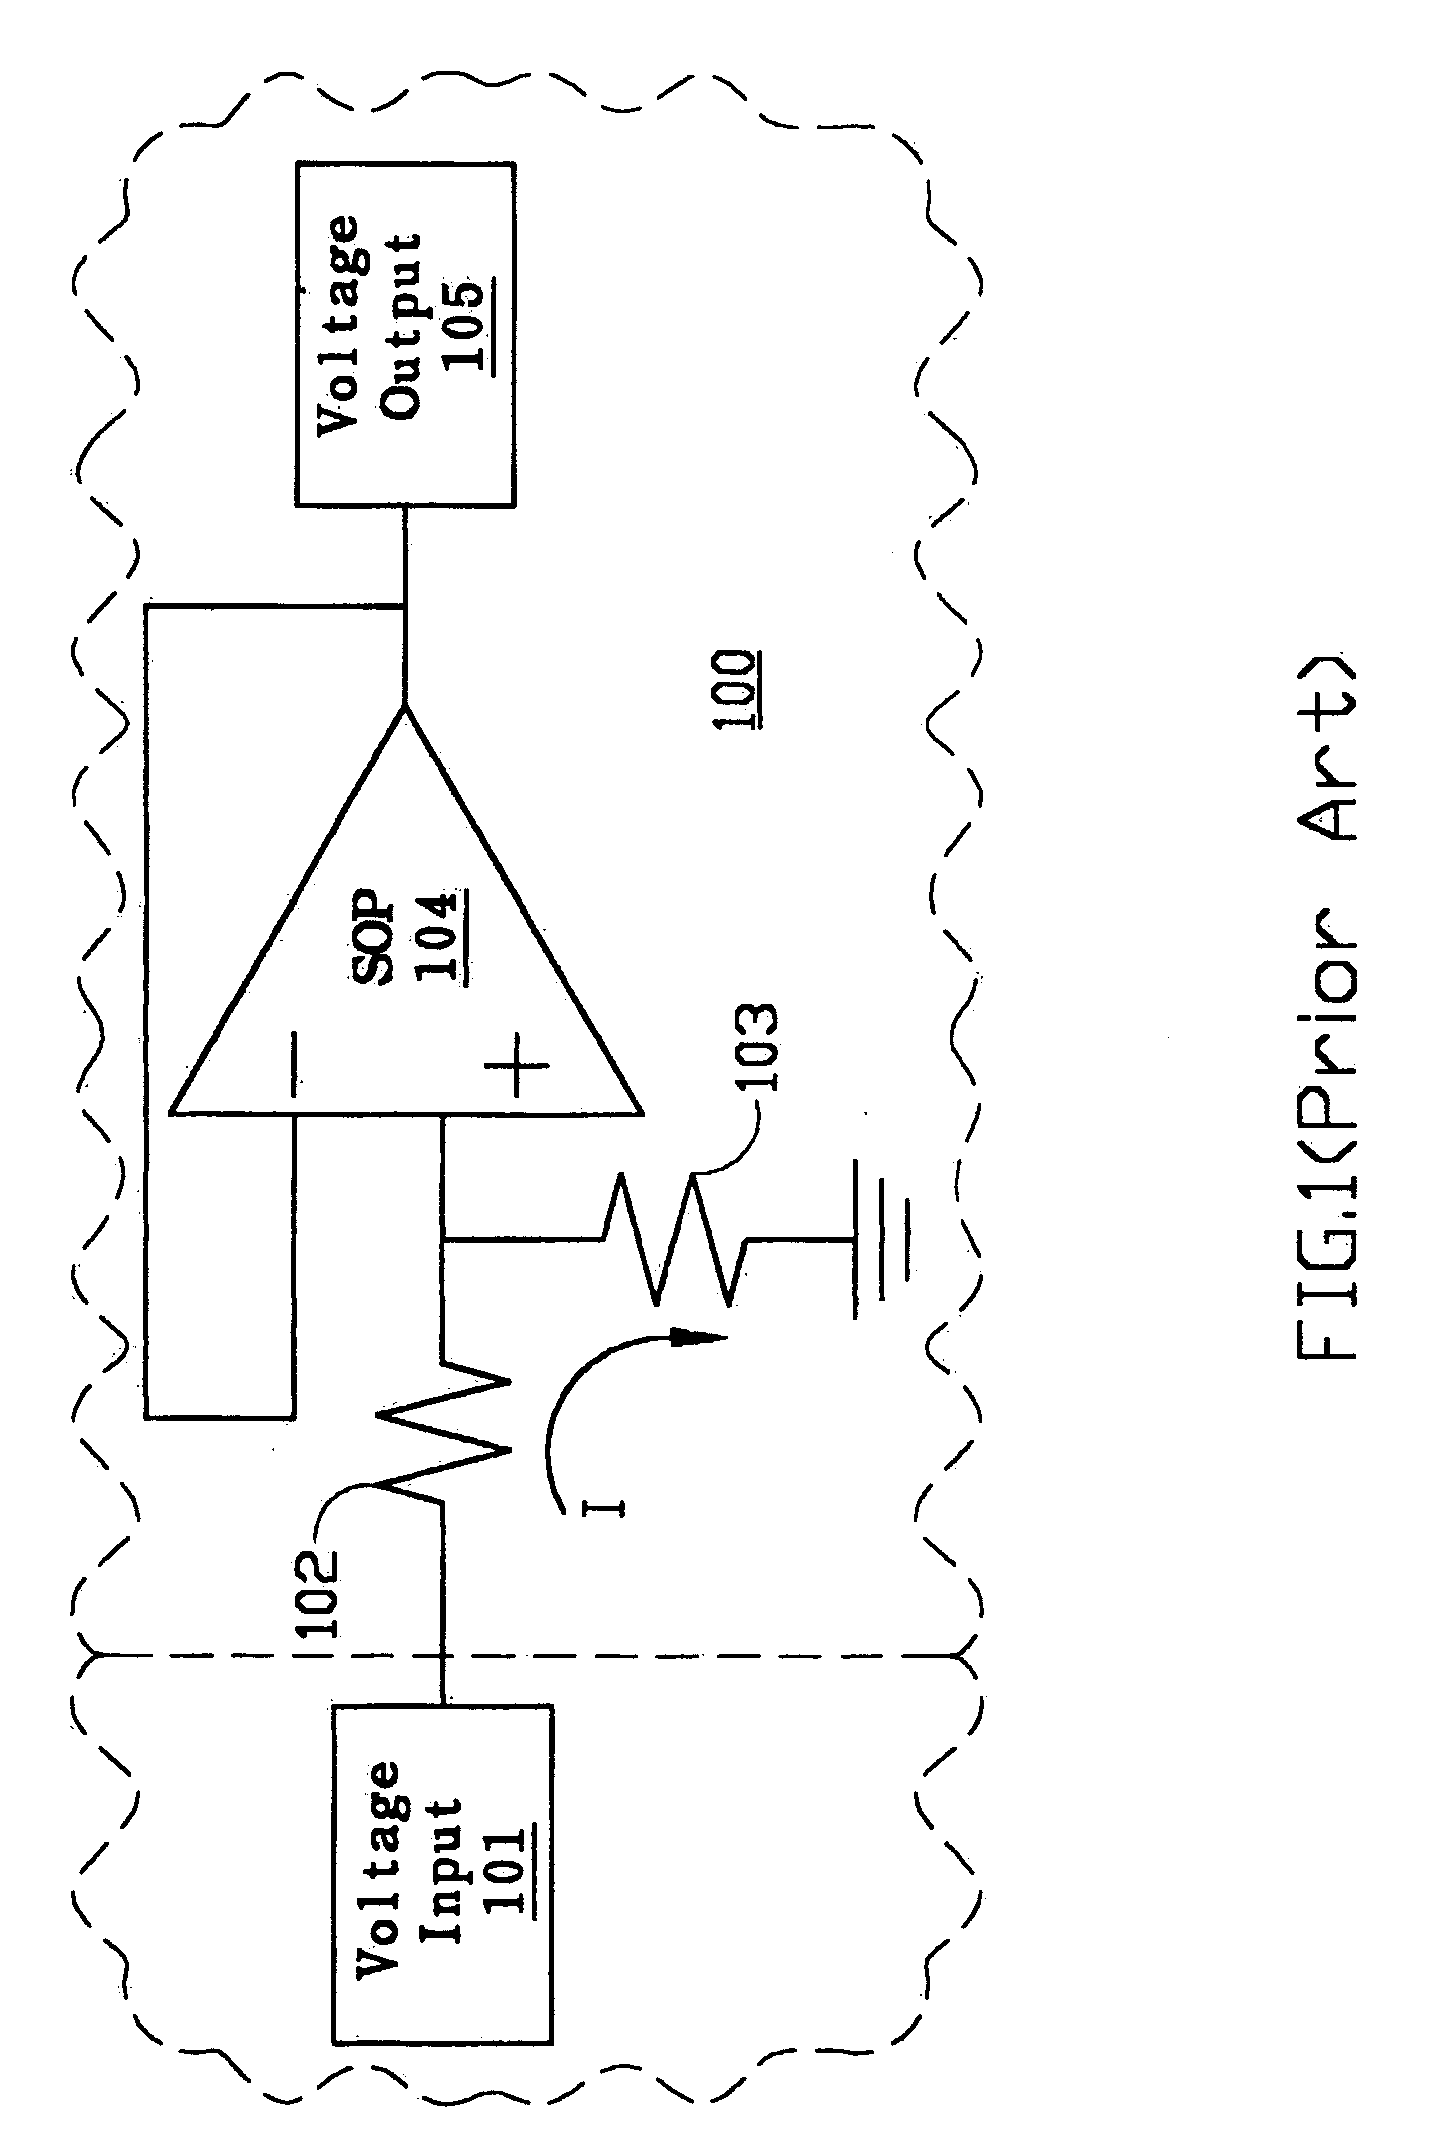 System of sampling interface for an optical pick-up head